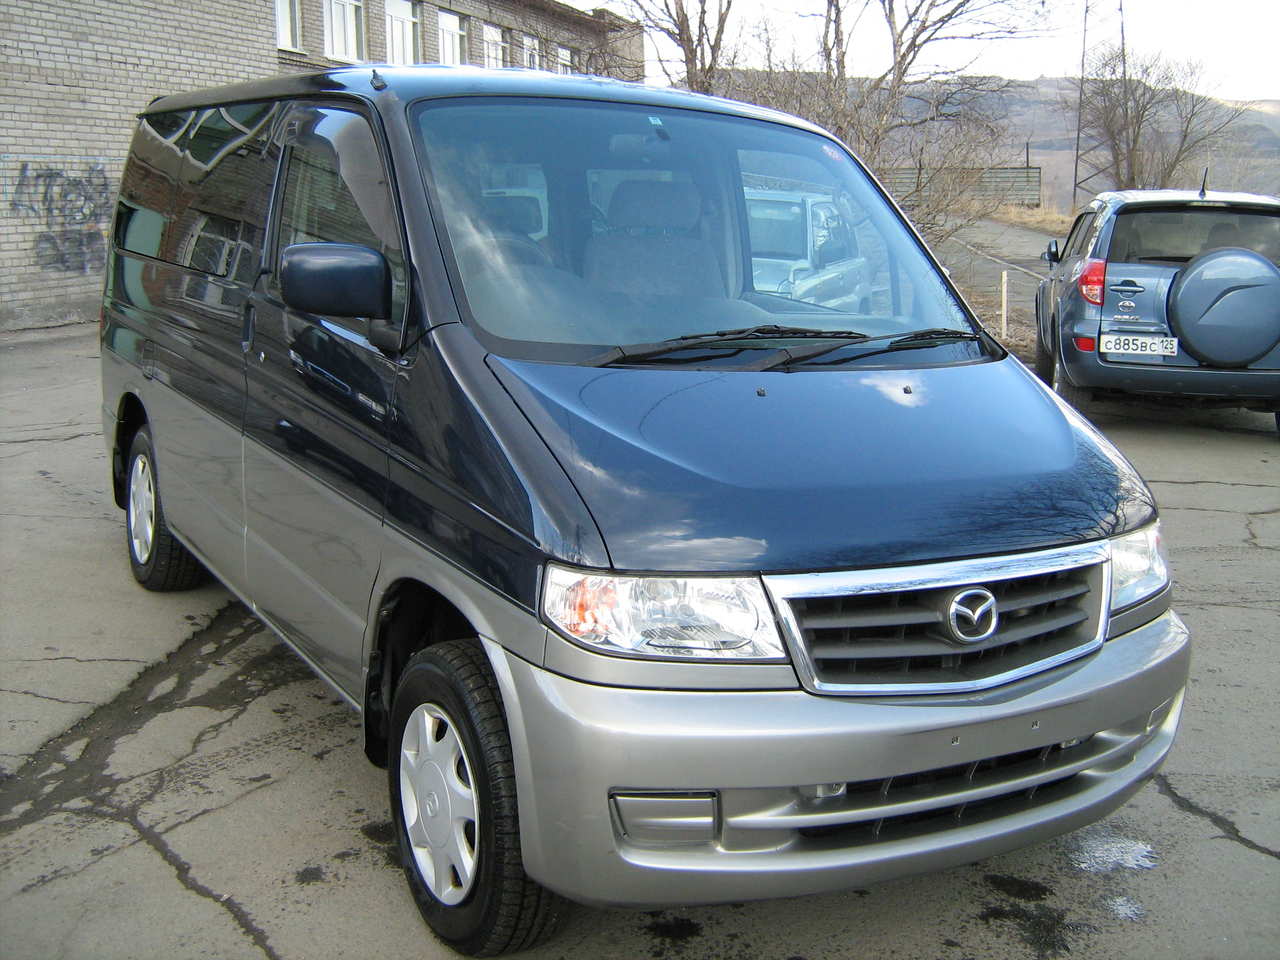 1999 Mazda Bongo Friendee For Sale, 2.5, Diesel, Automatic For Sale